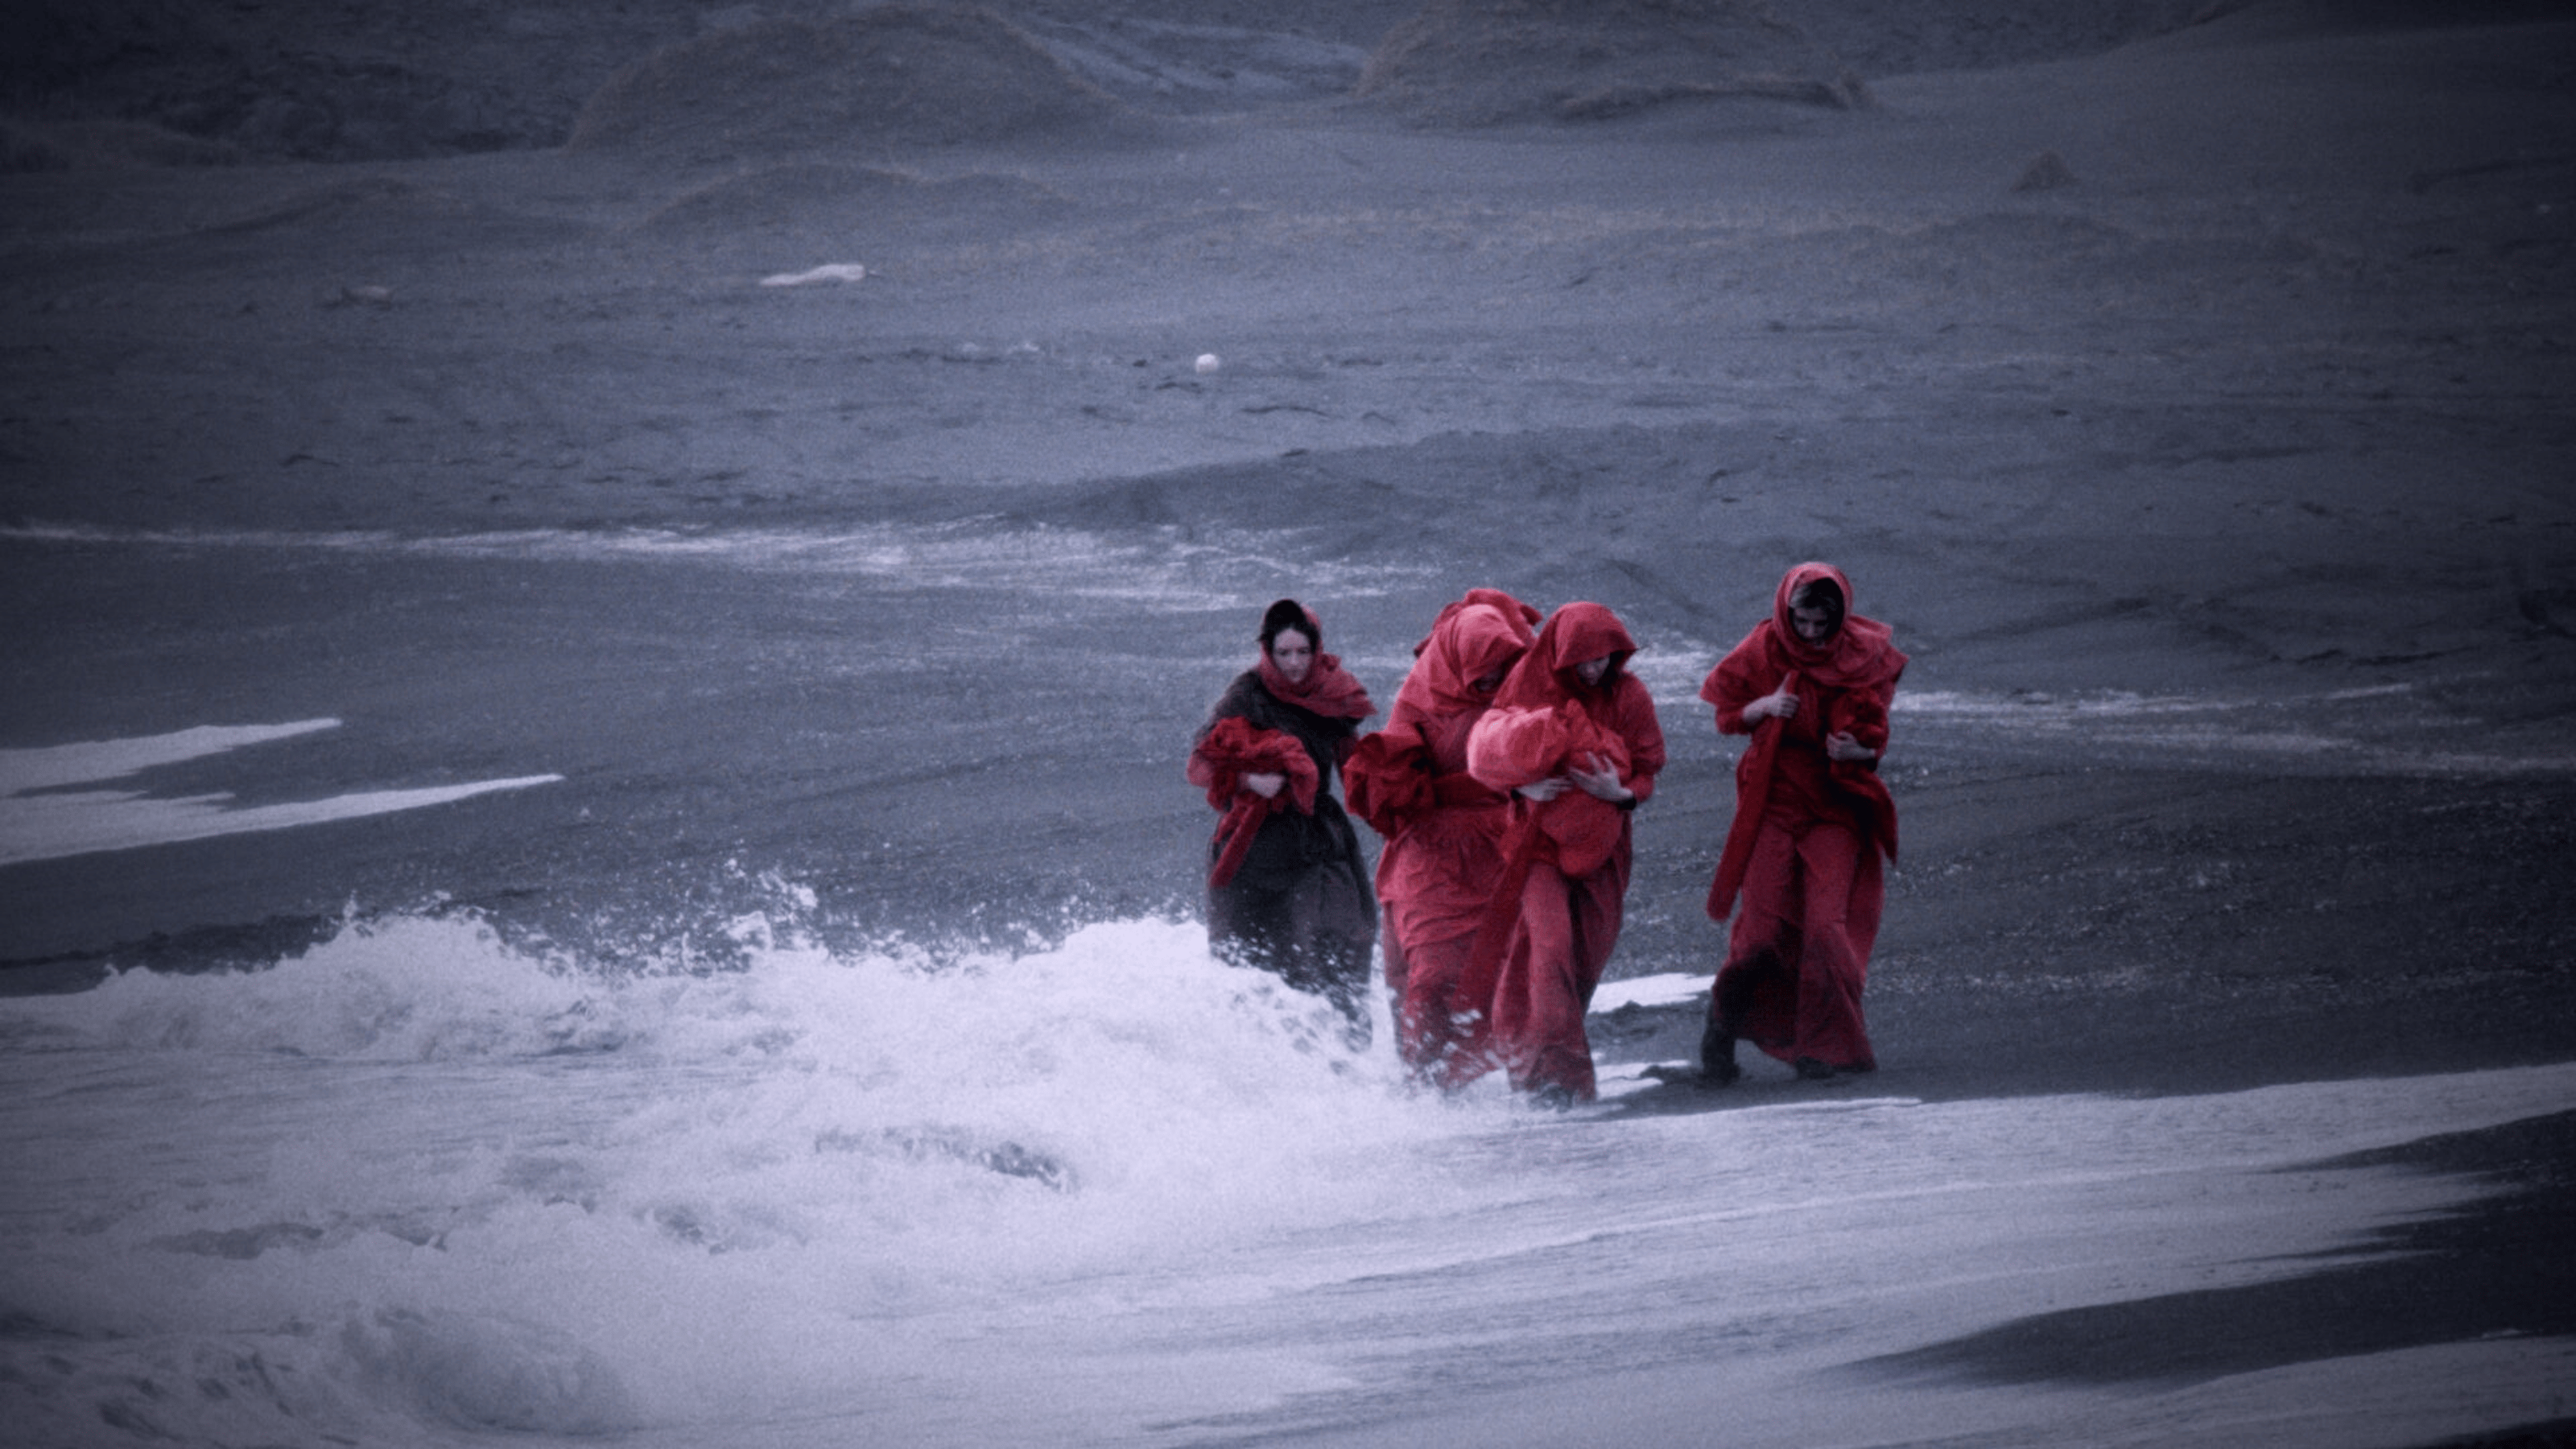 Women in red garbs walking by the sea, with waves hitting them.